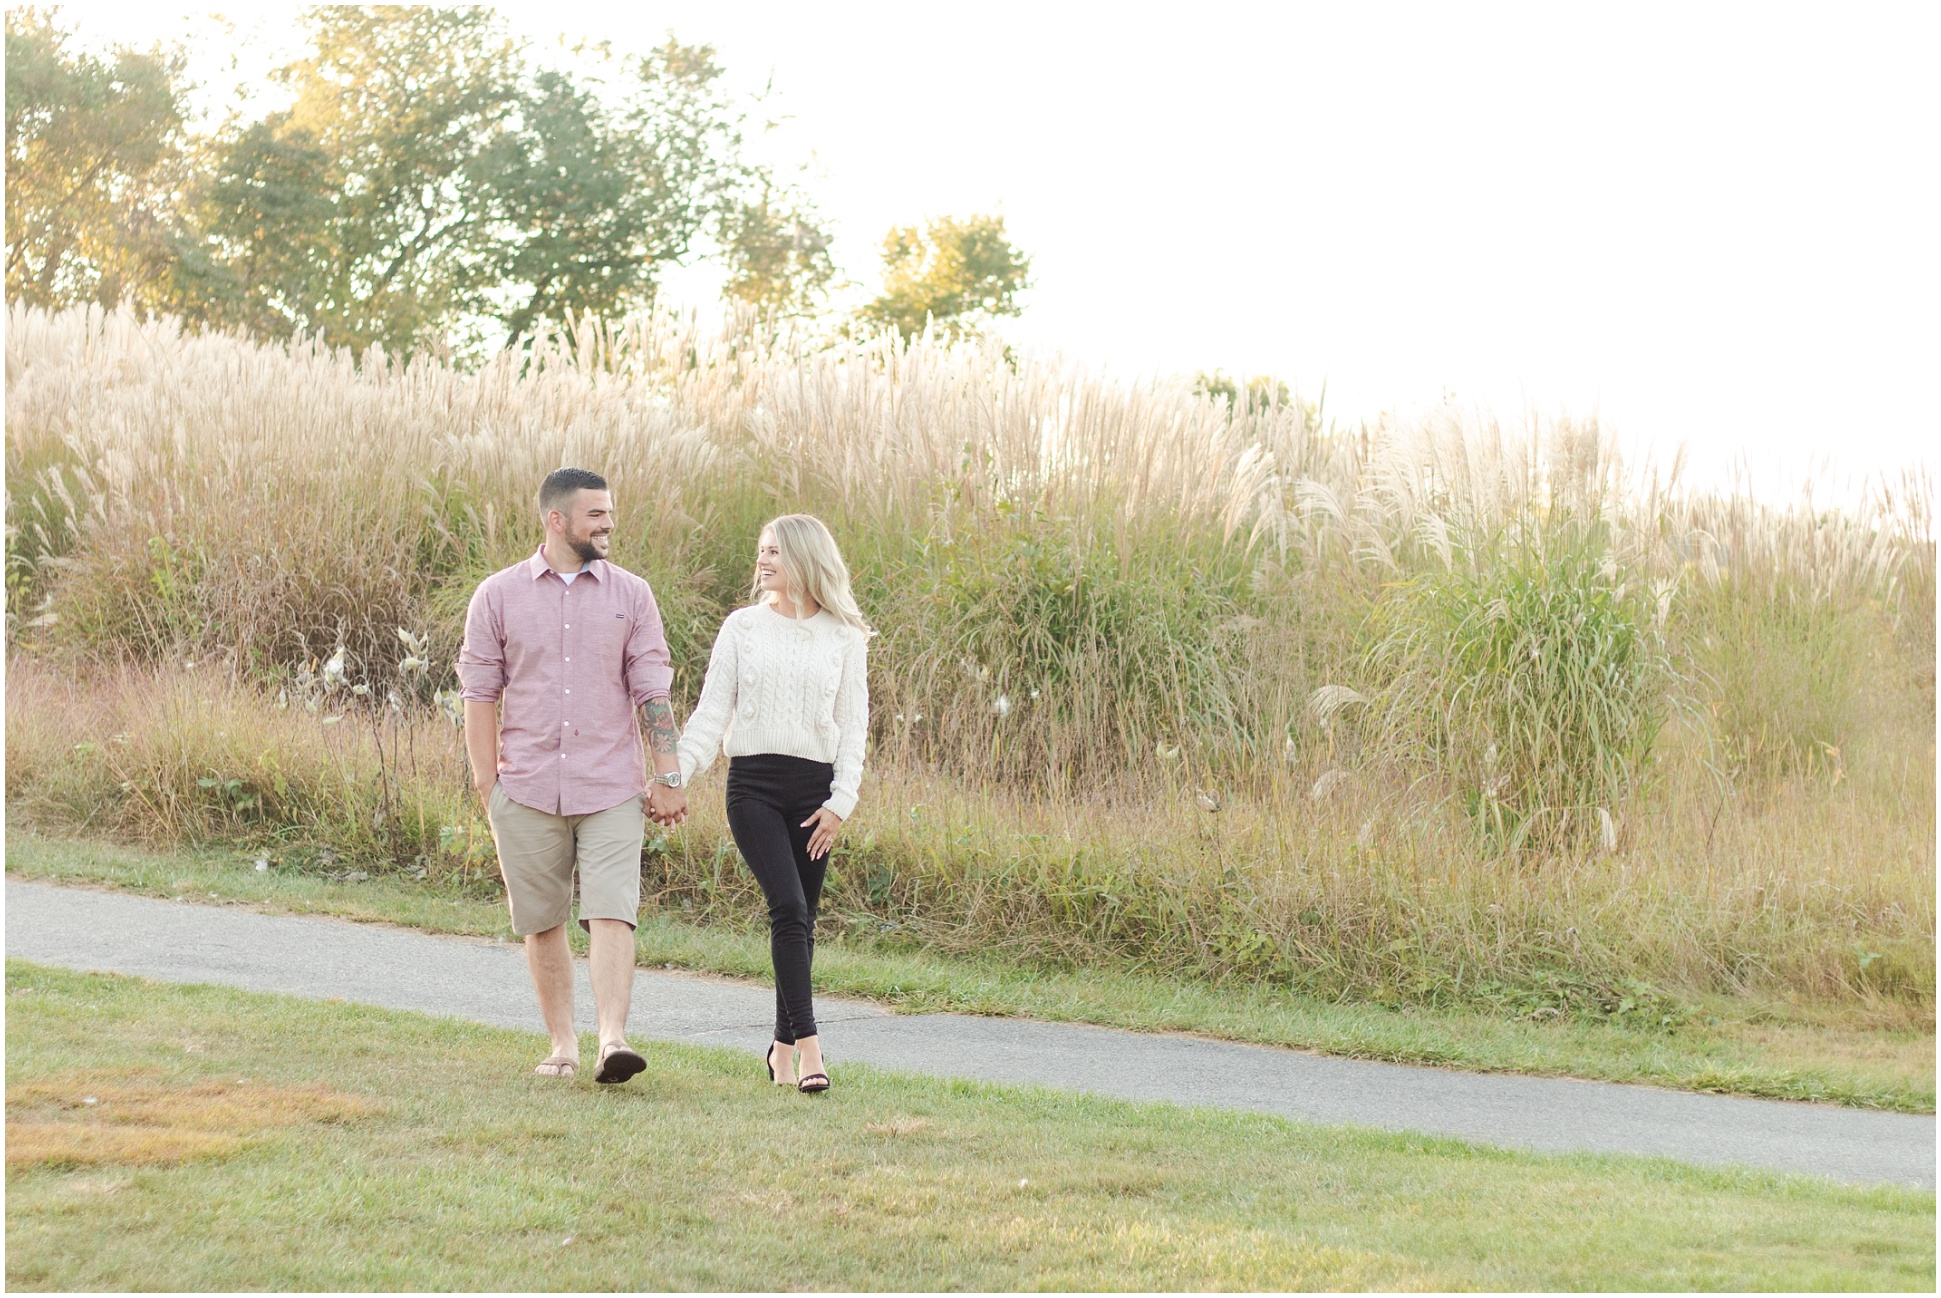 Engaged couple walking on the golf course in front of the golden wheat grass.